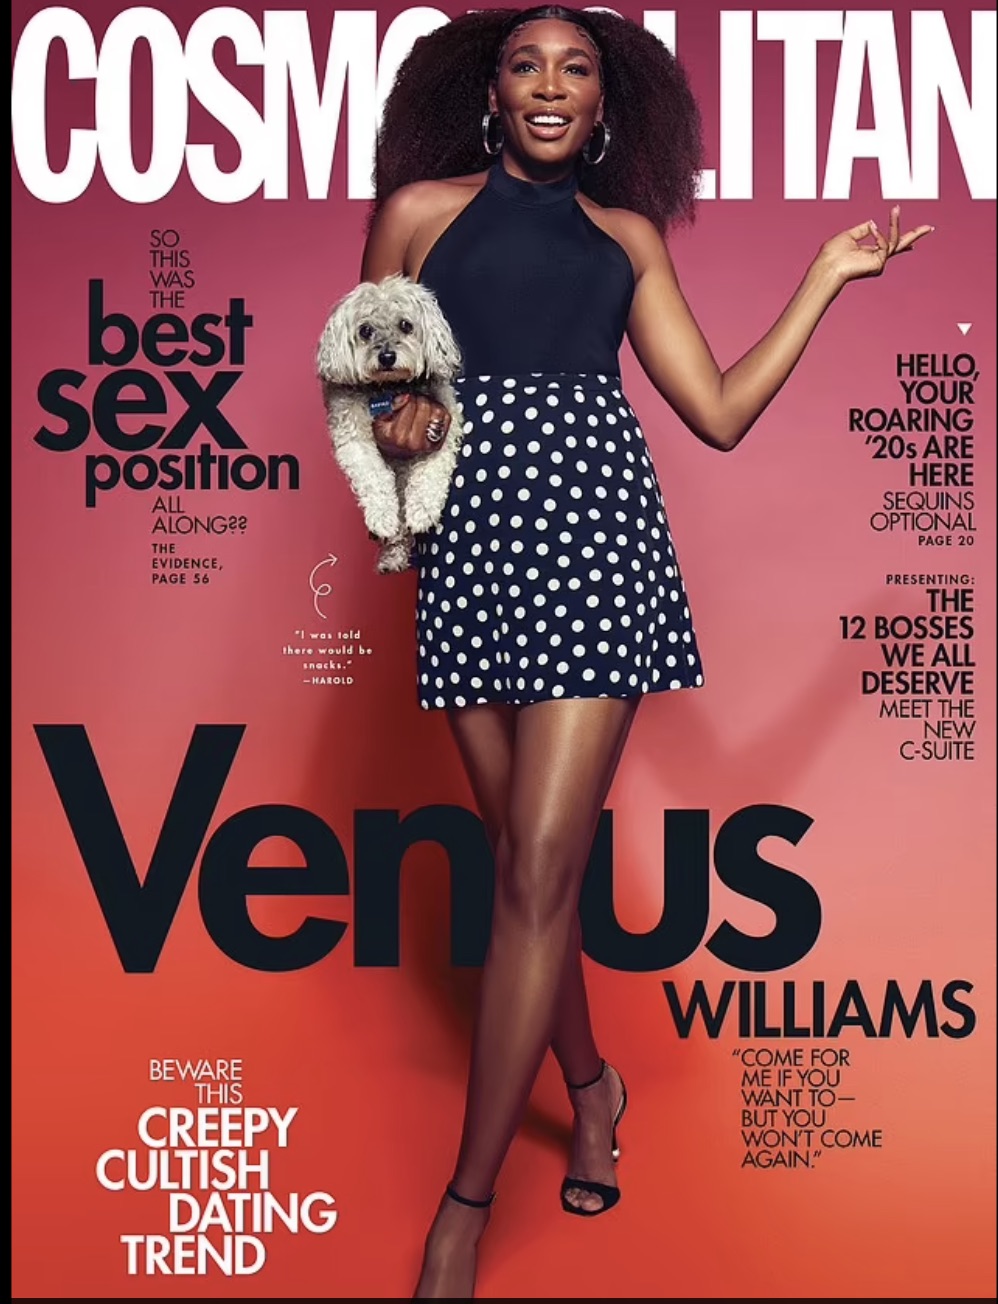 Venus Williams on the cover of October edition of Cosmopolitan